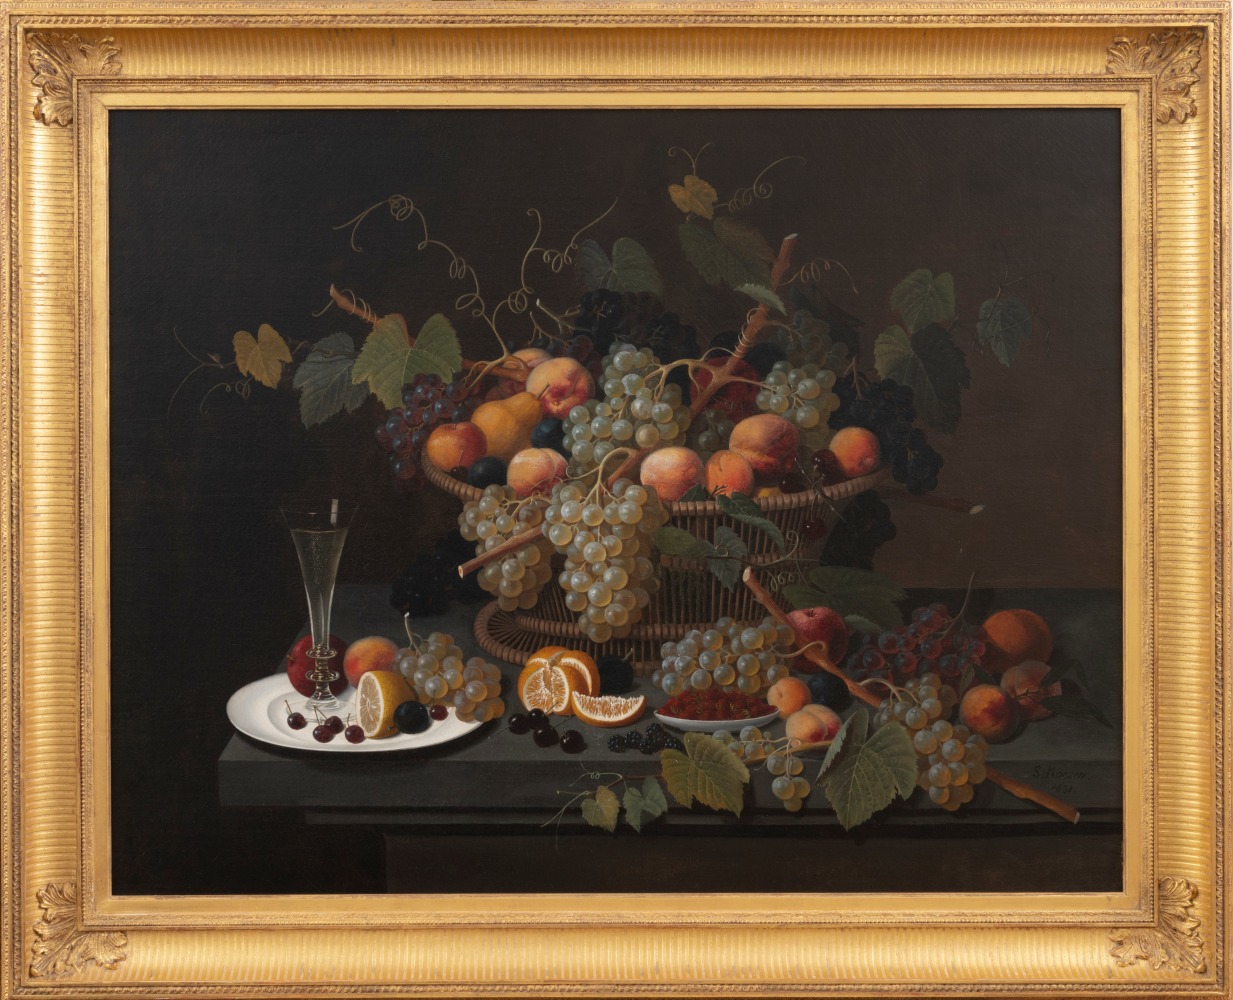 Severin Roesen (1816–c. 1872). Still Life with Champagne and Fruit, 1851. Oil on canvas, 35 3/8 x 45 in., signed and dated lower right: S. Roesen / 1851 (framed)